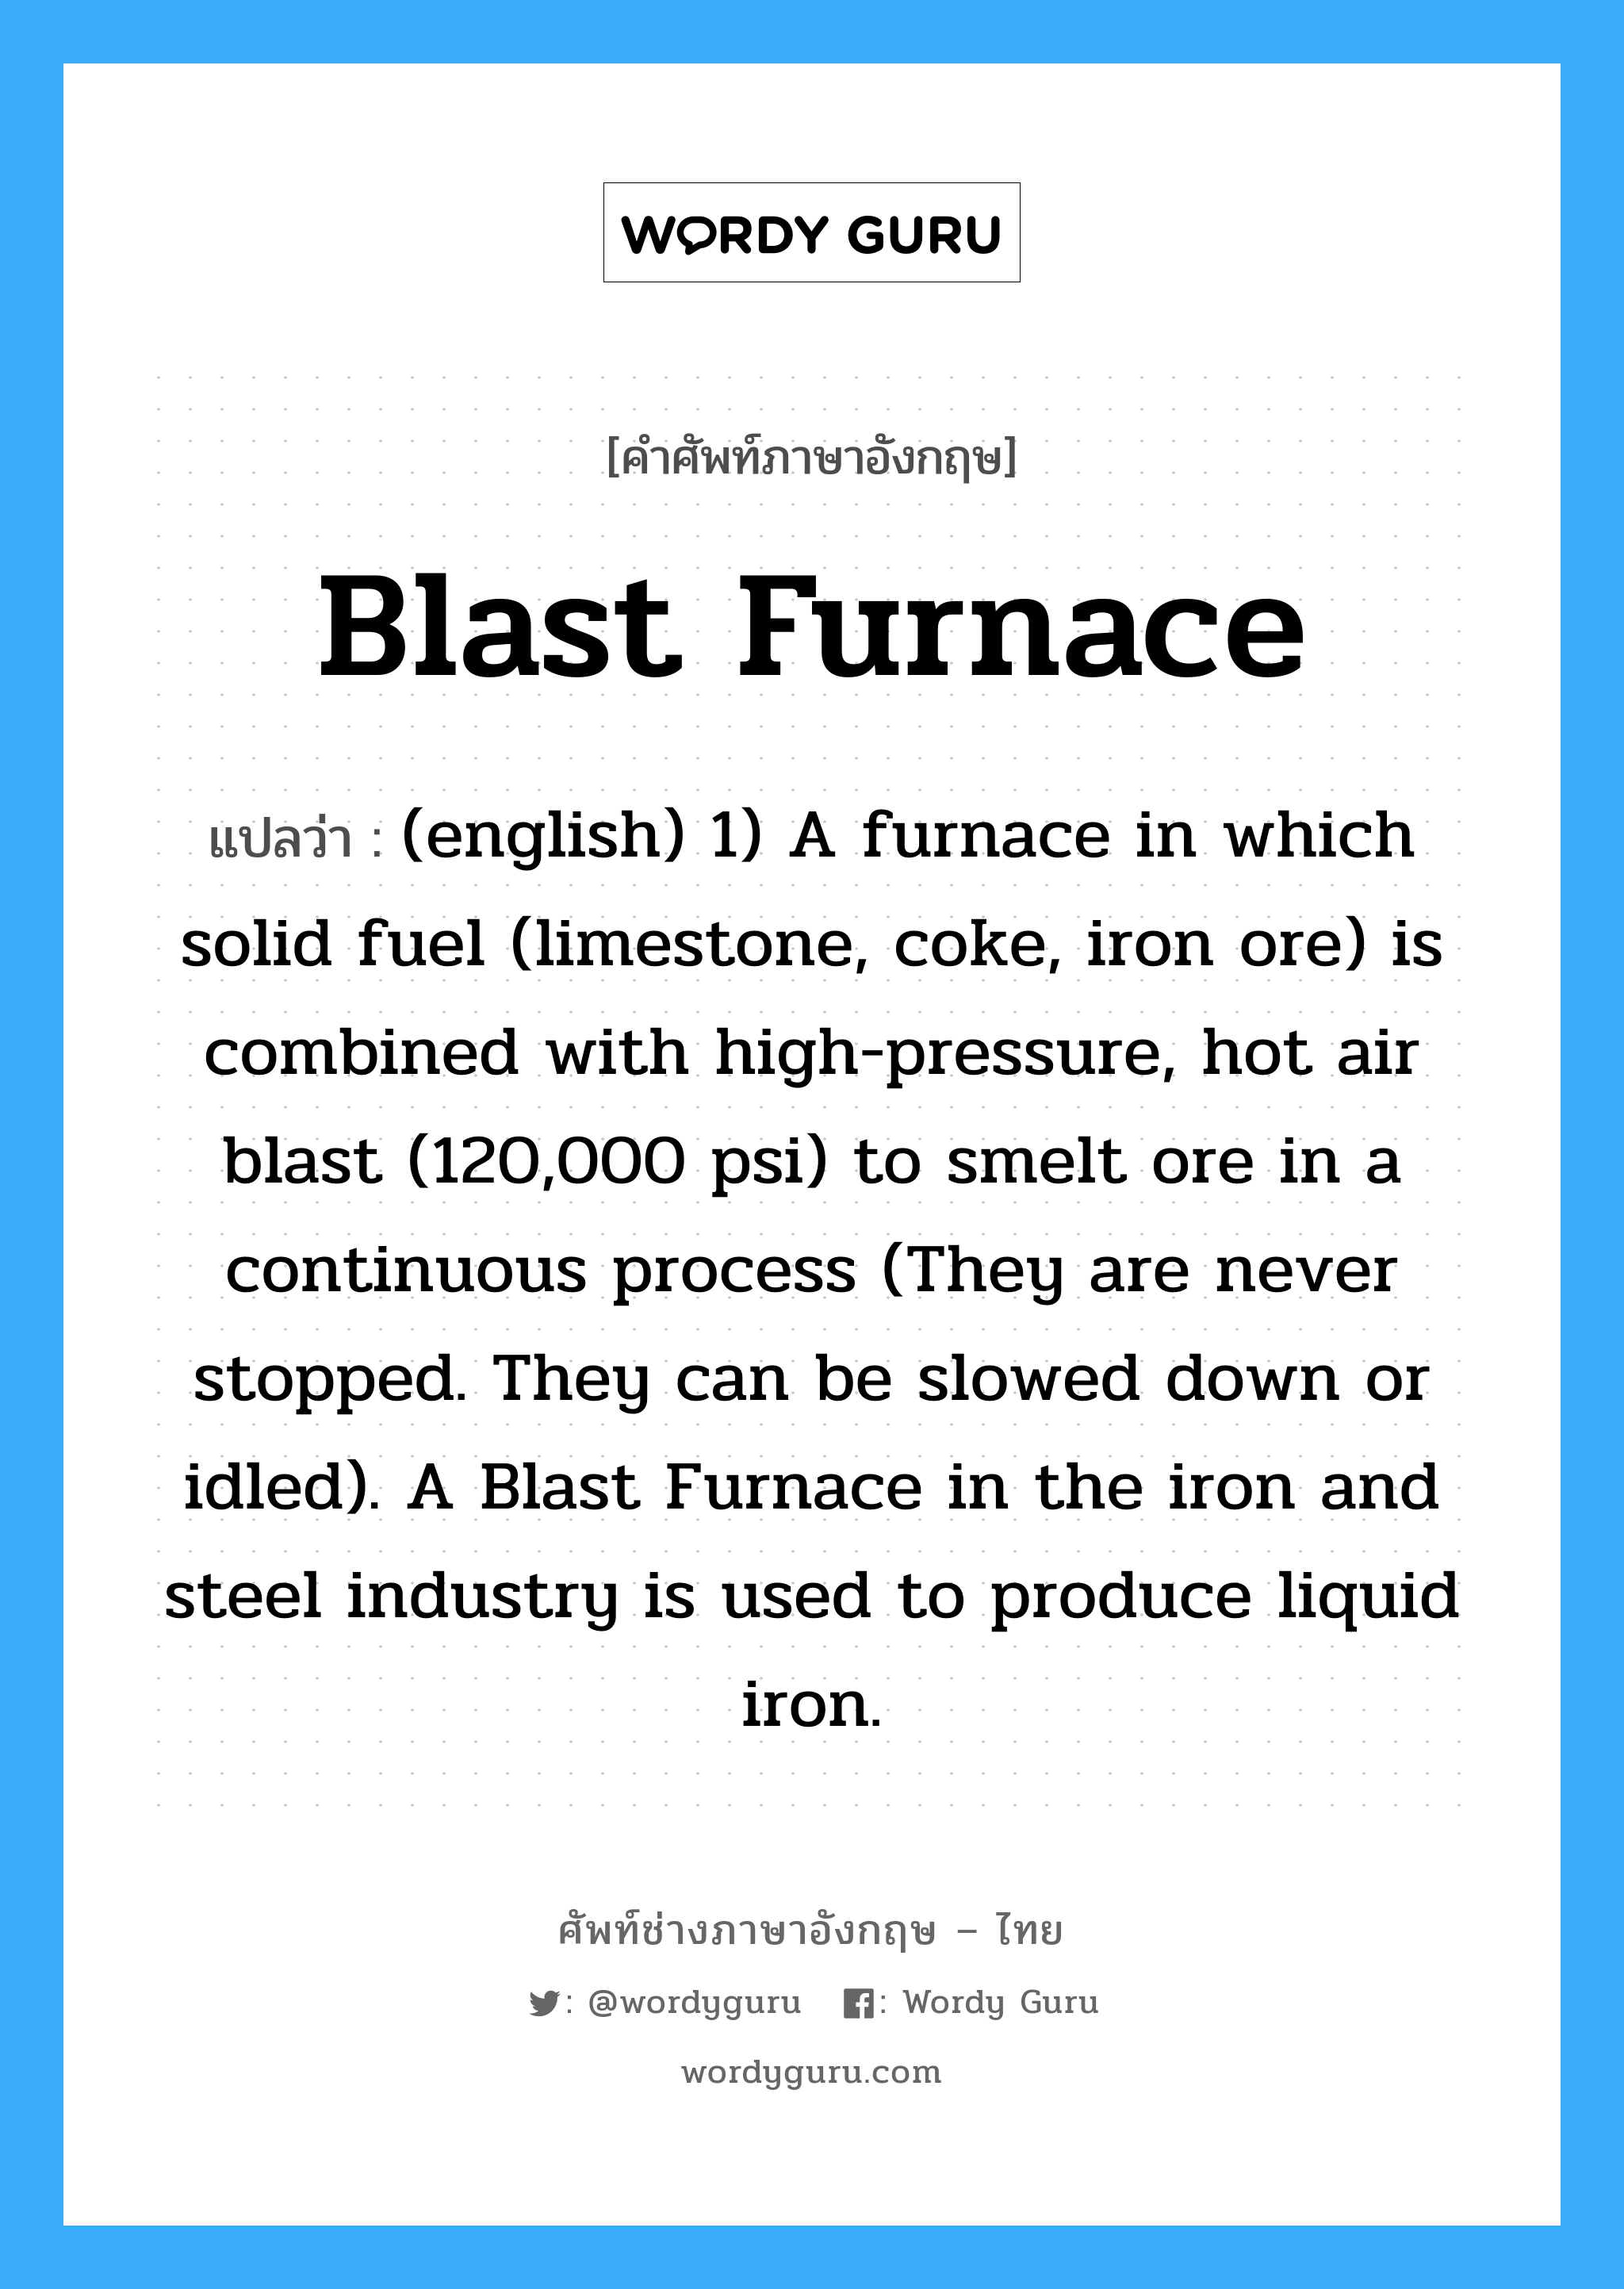 blast-furnace แปลว่า?, คำศัพท์ช่างภาษาอังกฤษ - ไทย Blast Furnace คำศัพท์ภาษาอังกฤษ Blast Furnace แปลว่า (english) 1) A furnace in which solid fuel (limestone, coke, iron ore) is combined with high-pressure, hot air blast (120,000 psi) to smelt ore in a continuous process (They are never stopped. They can be slowed down or idled). A Blast Furnace in the iron and steel industry is used to produce liquid iron.